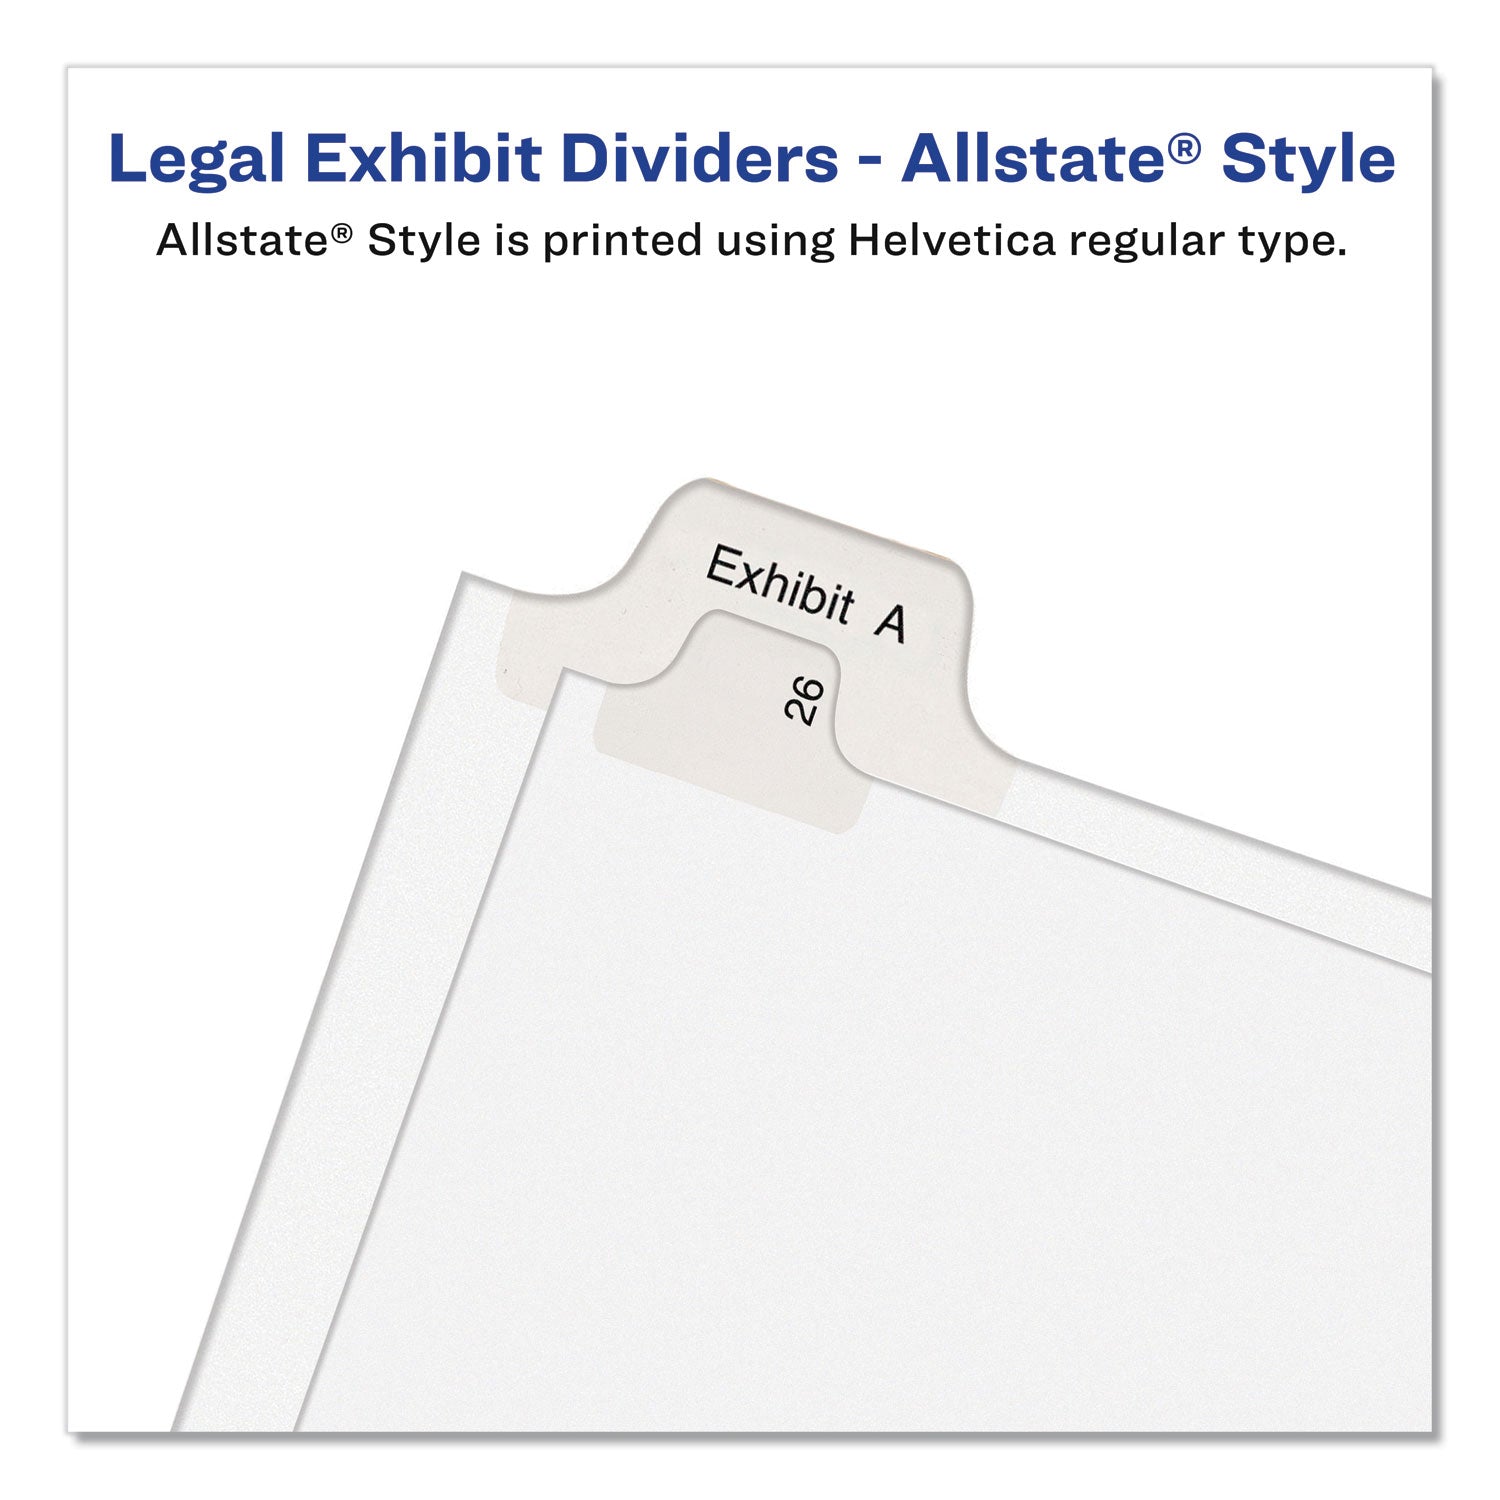 Preprinted Legal Exhibit Side Tab Index Dividers, Allstate Style, 26-Tab, Exhibit A to Exhibit Z, 11 x 8.5, White, 1 Set - 